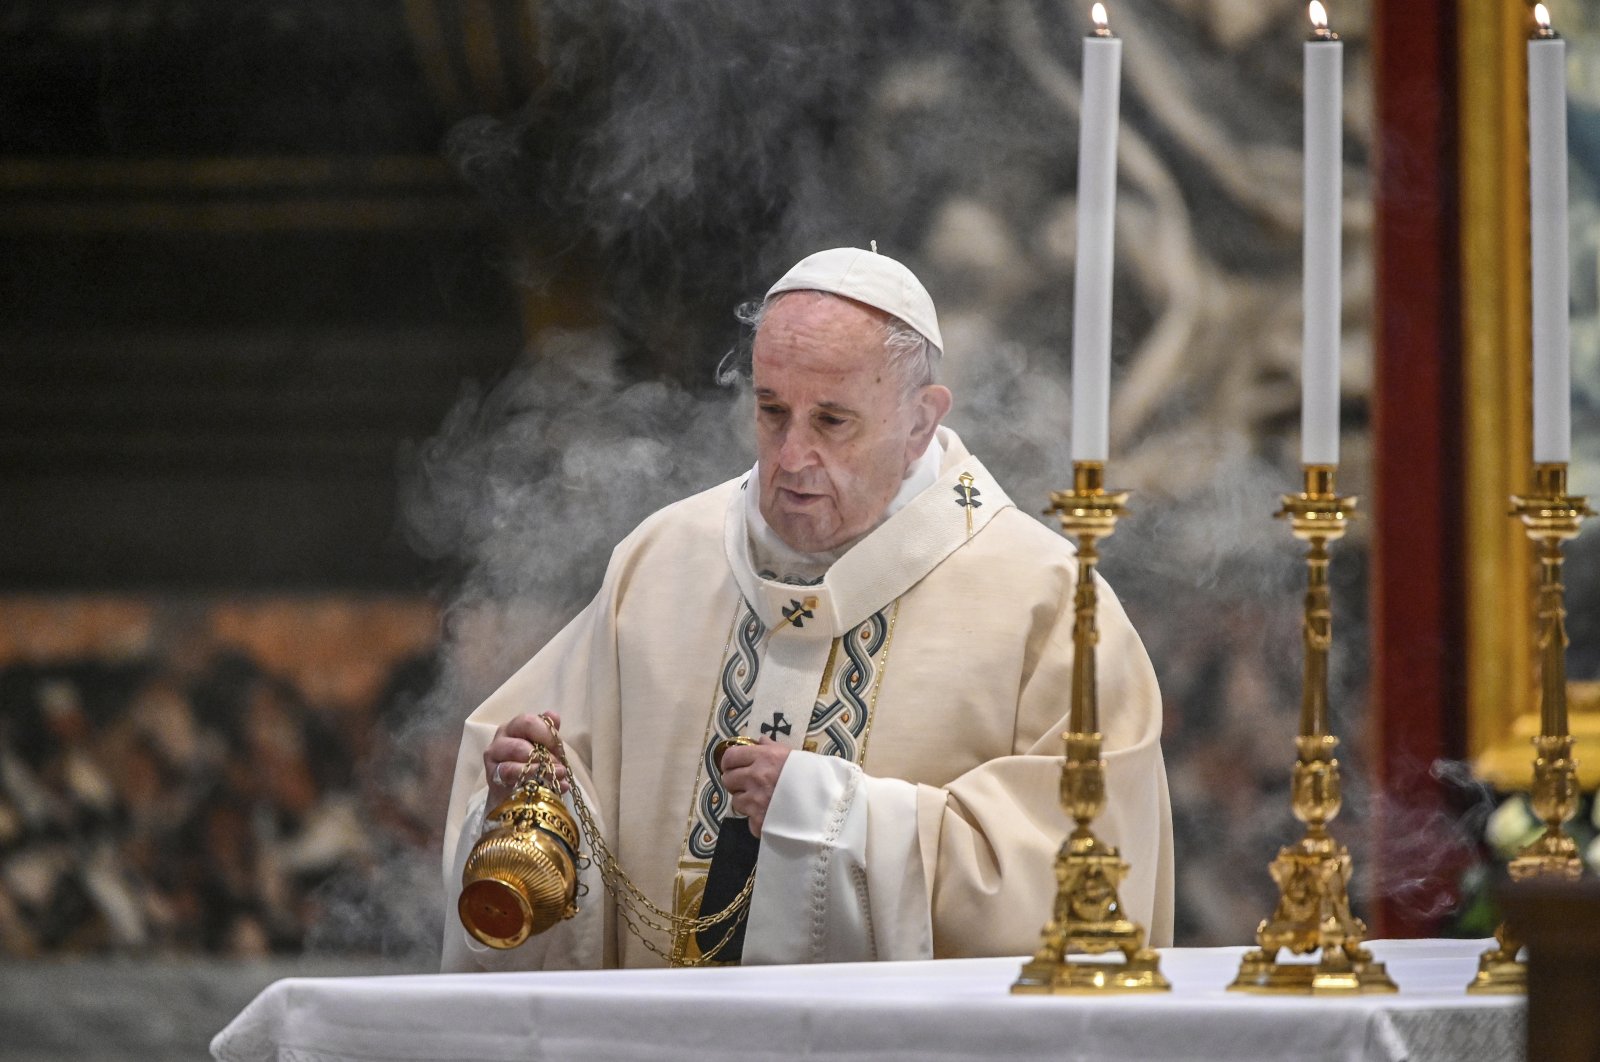 In this Nov. 22, 2020, file photo, Pope Francis incenses the altar as he celebrates Mass on the occasion of the Christ the King festivity, in St. Peter's Basilica at the Vatican. (AP Photo)